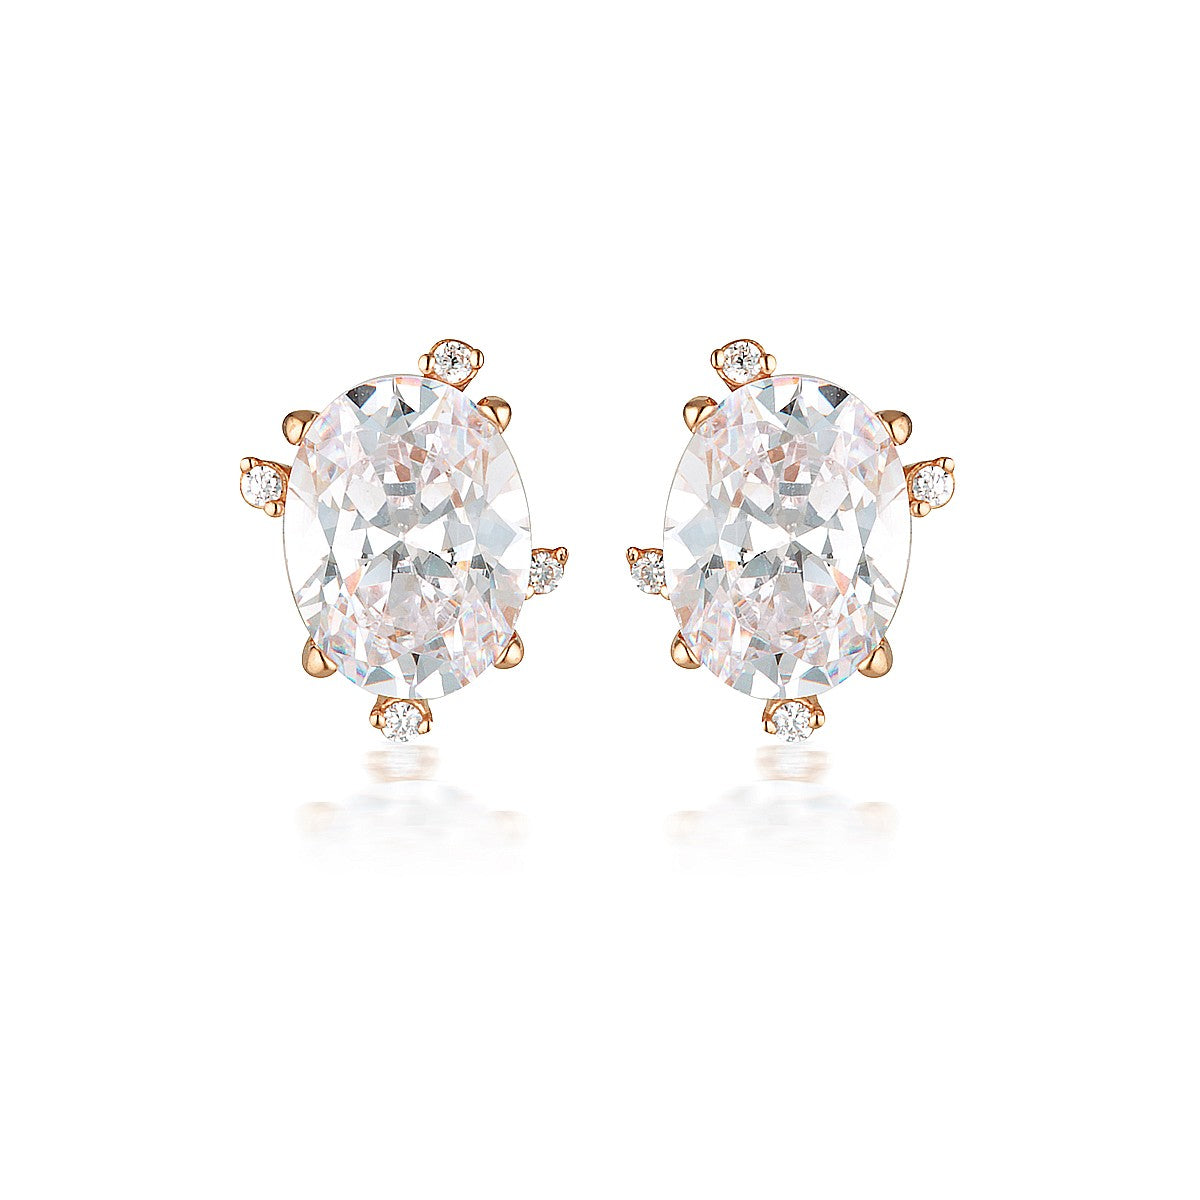 AURORA SOUTHERN LIGHTS EARRINGS ROSE GOLD